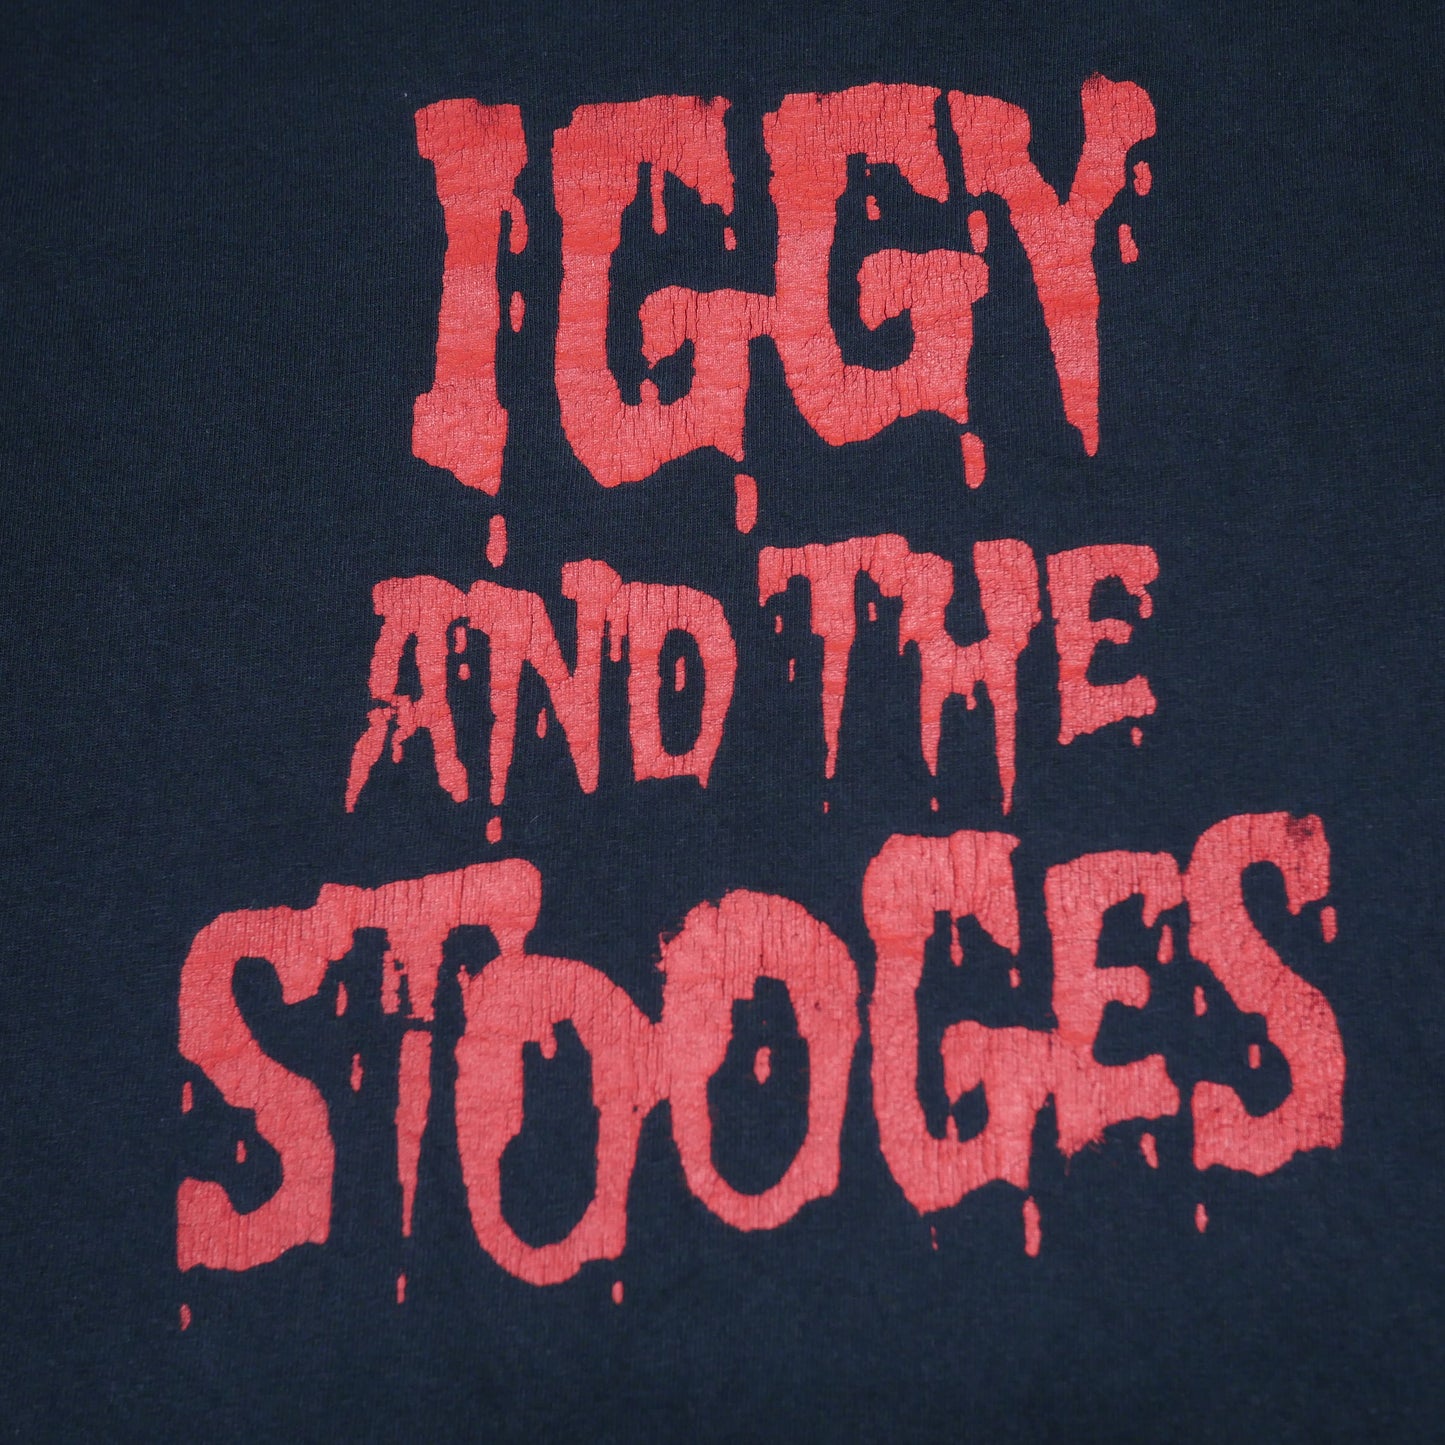 Iggy and the Stooges Shirt - Large